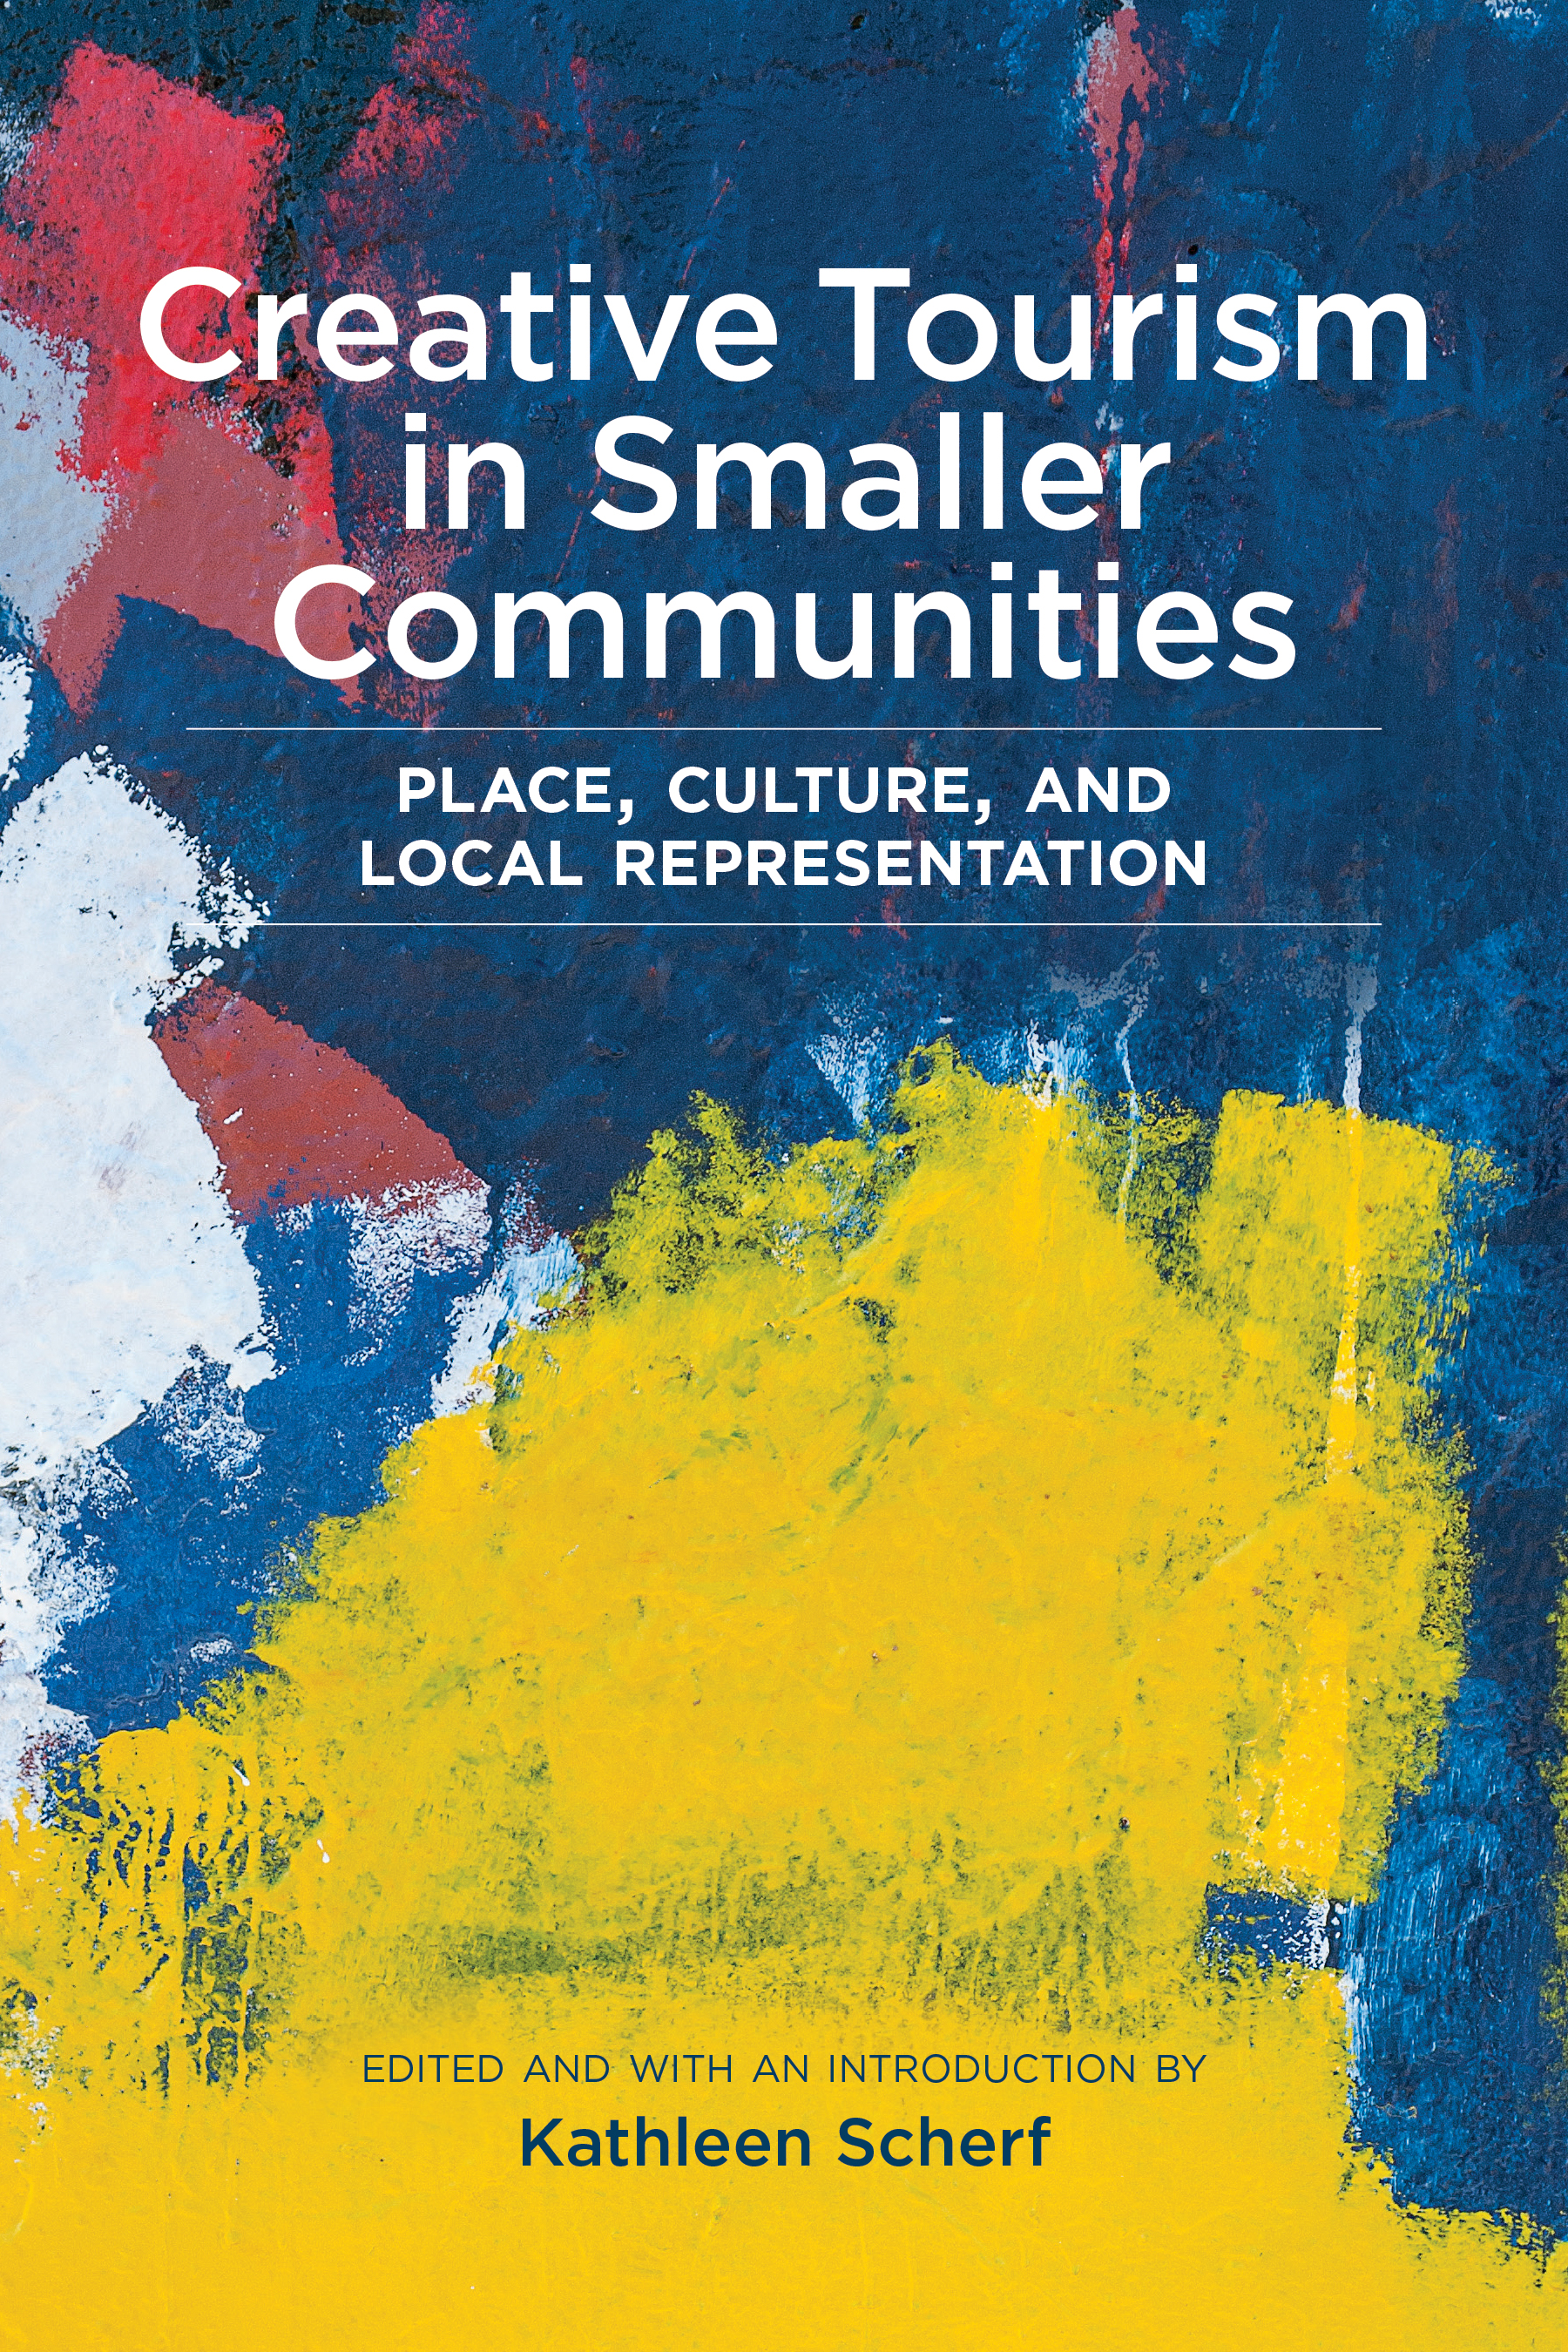 Cover Image for: Creative Tourism in Smaller Communities